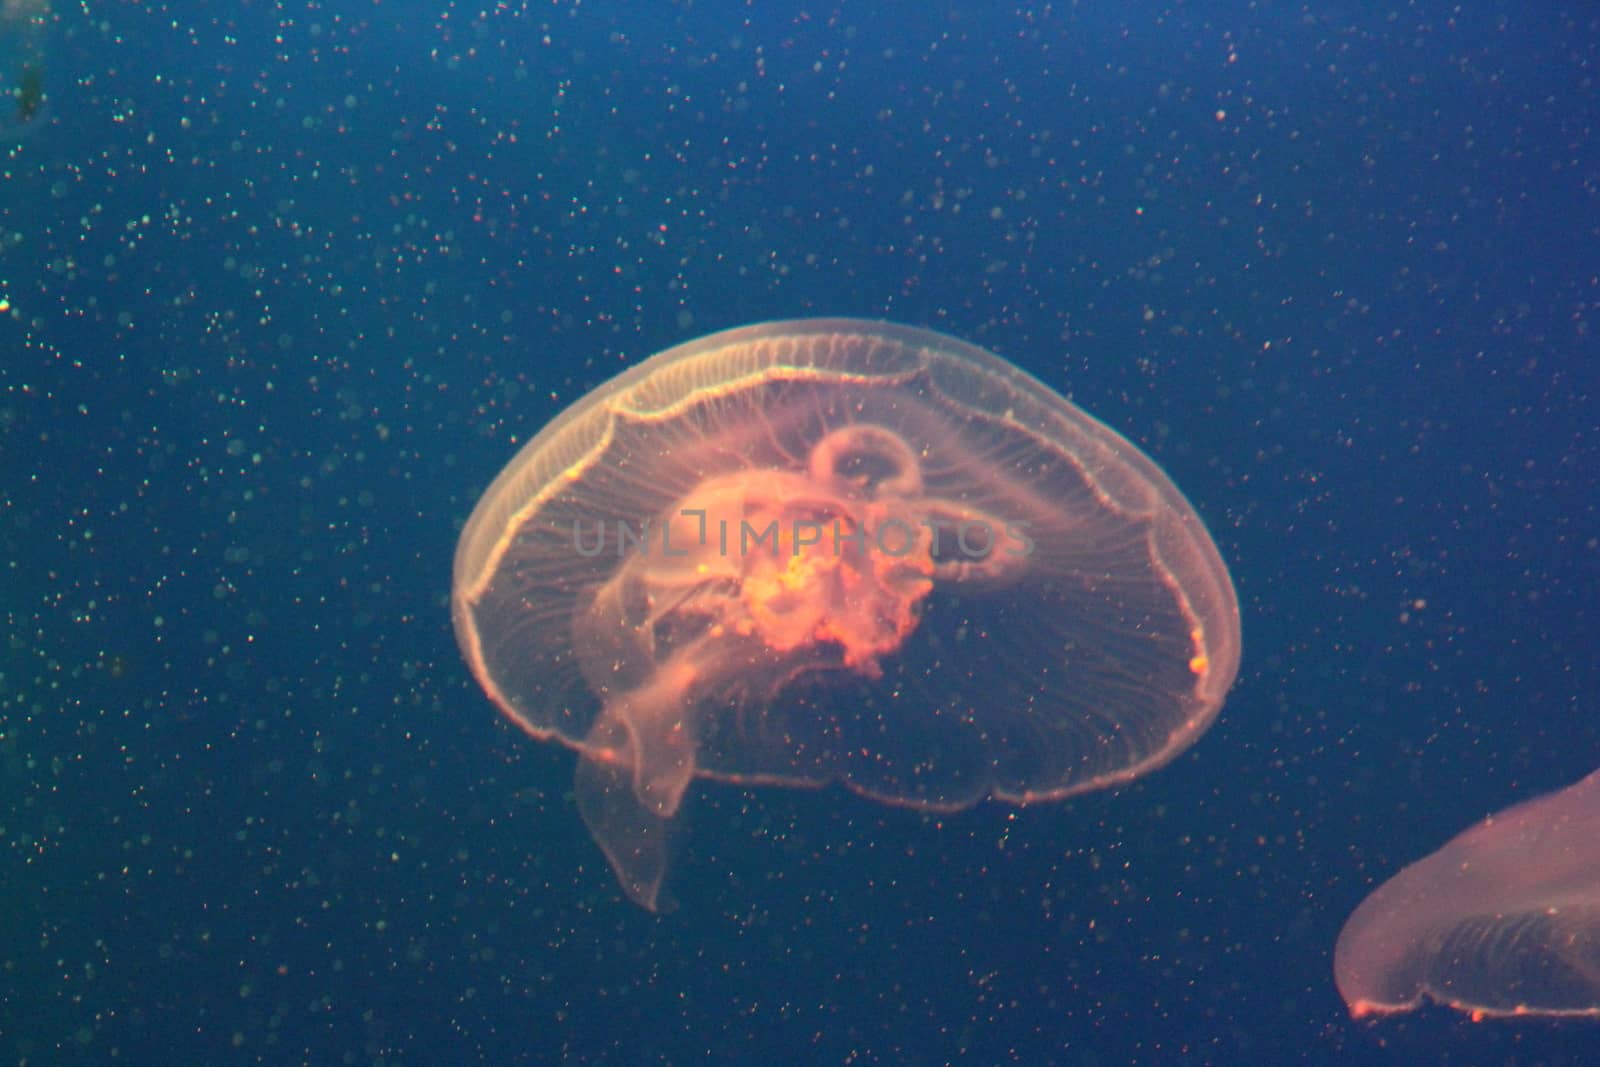 Large jellyfish in blue, clear sea water.